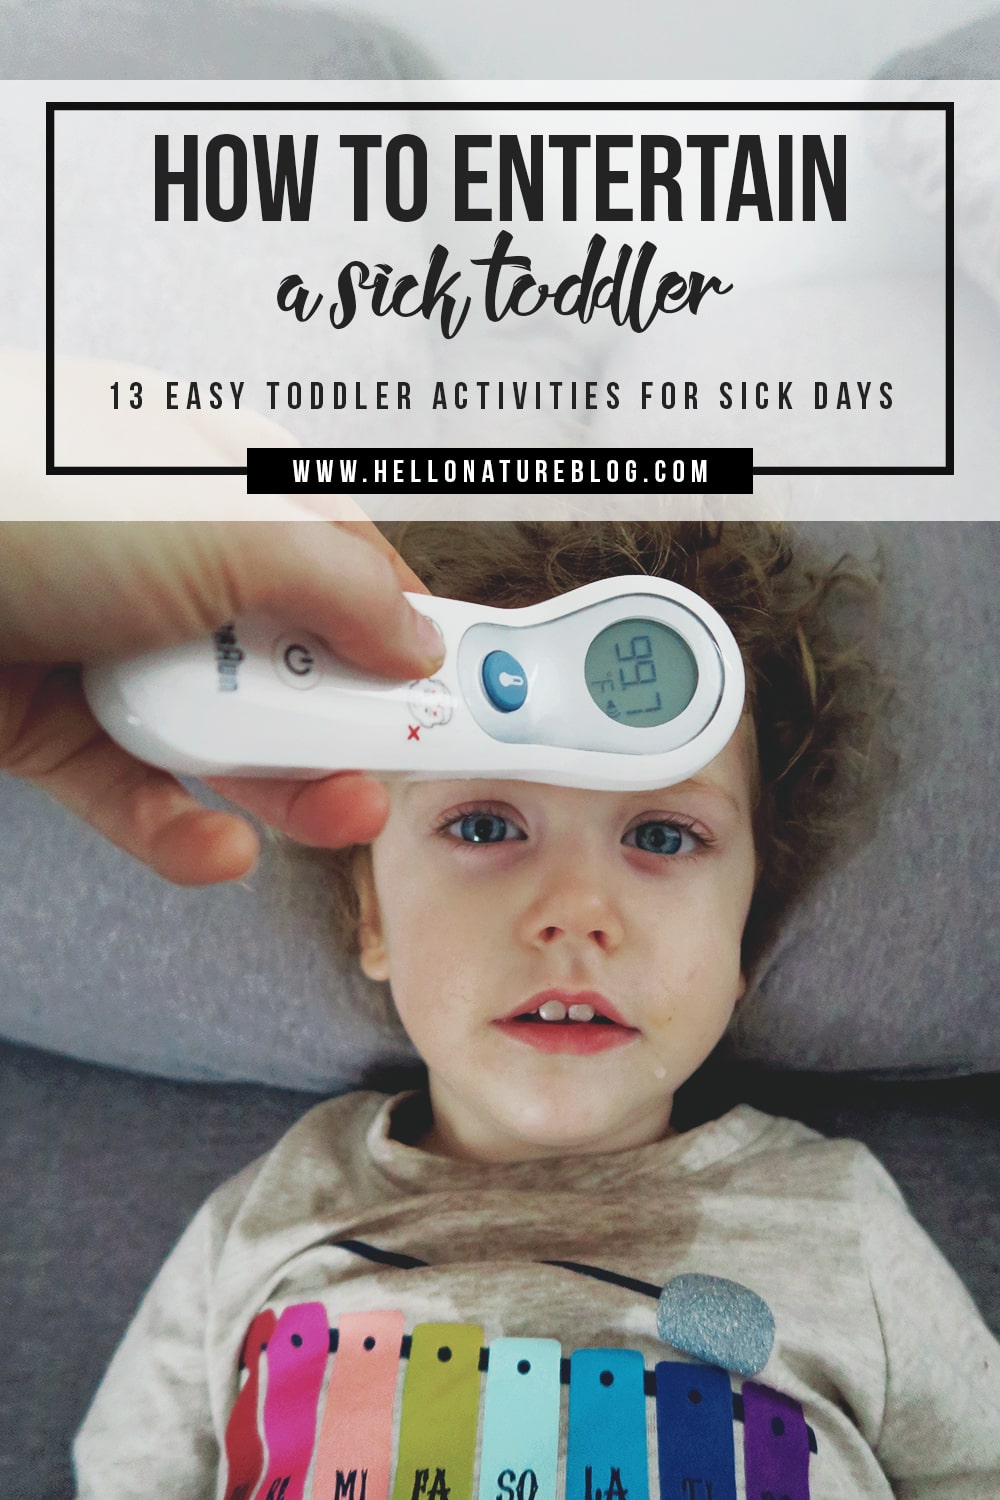 Not sure how to entertain your sick toddler? Check out these easy toddler activities to brighten up their day! You'll both be glad you did.